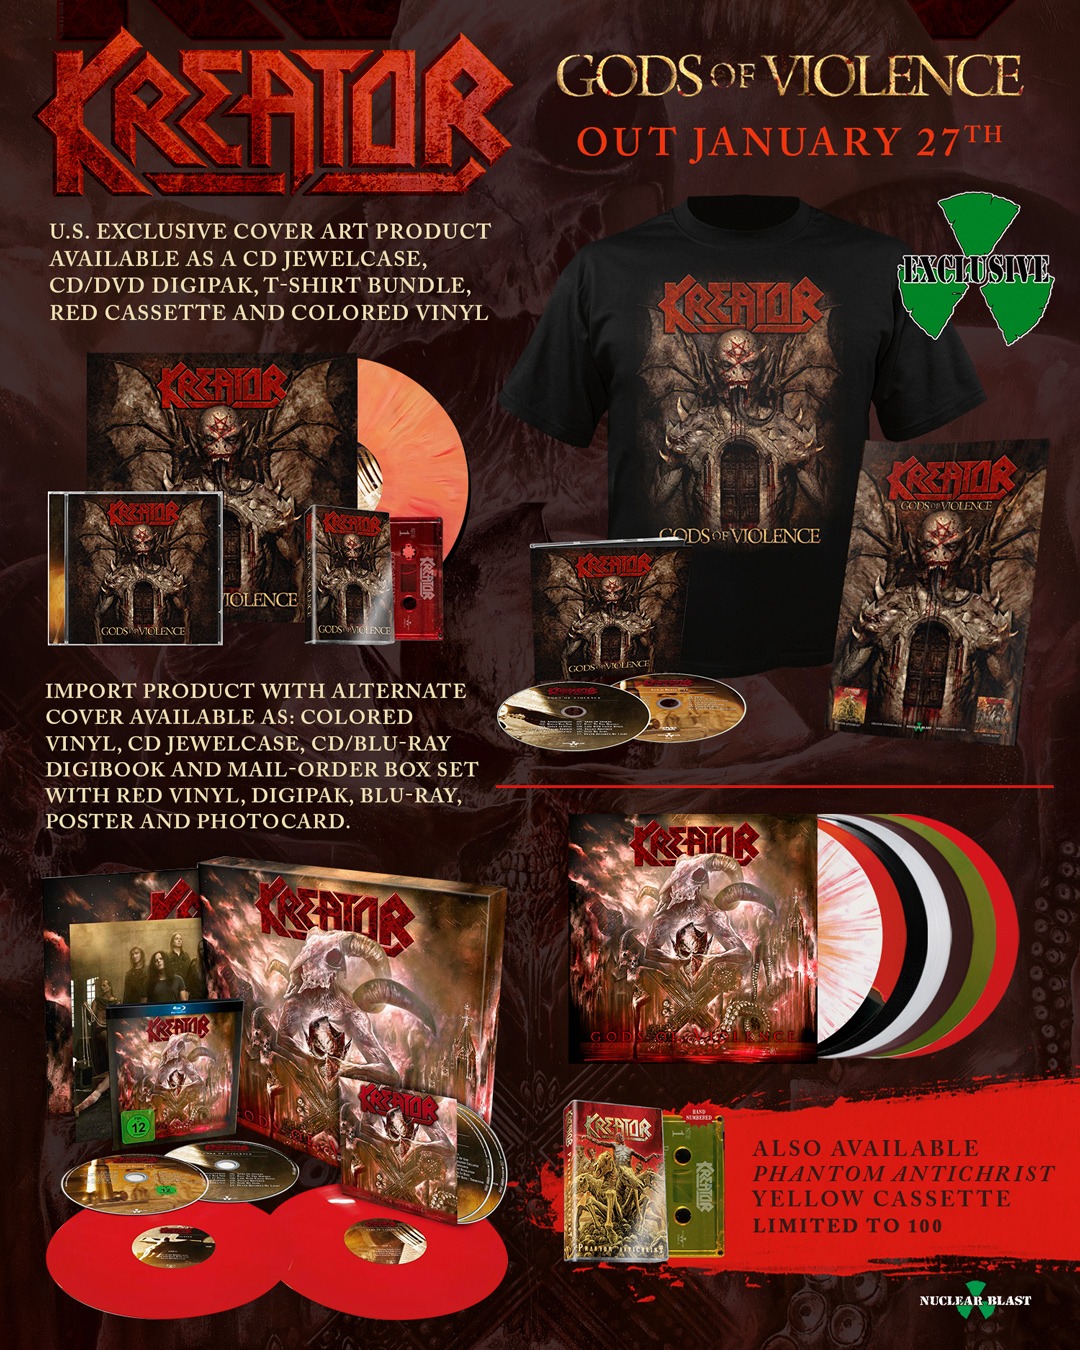 KREATOR - Release 4th Gods Of Violence Video Trailer & Special Tour Trailer